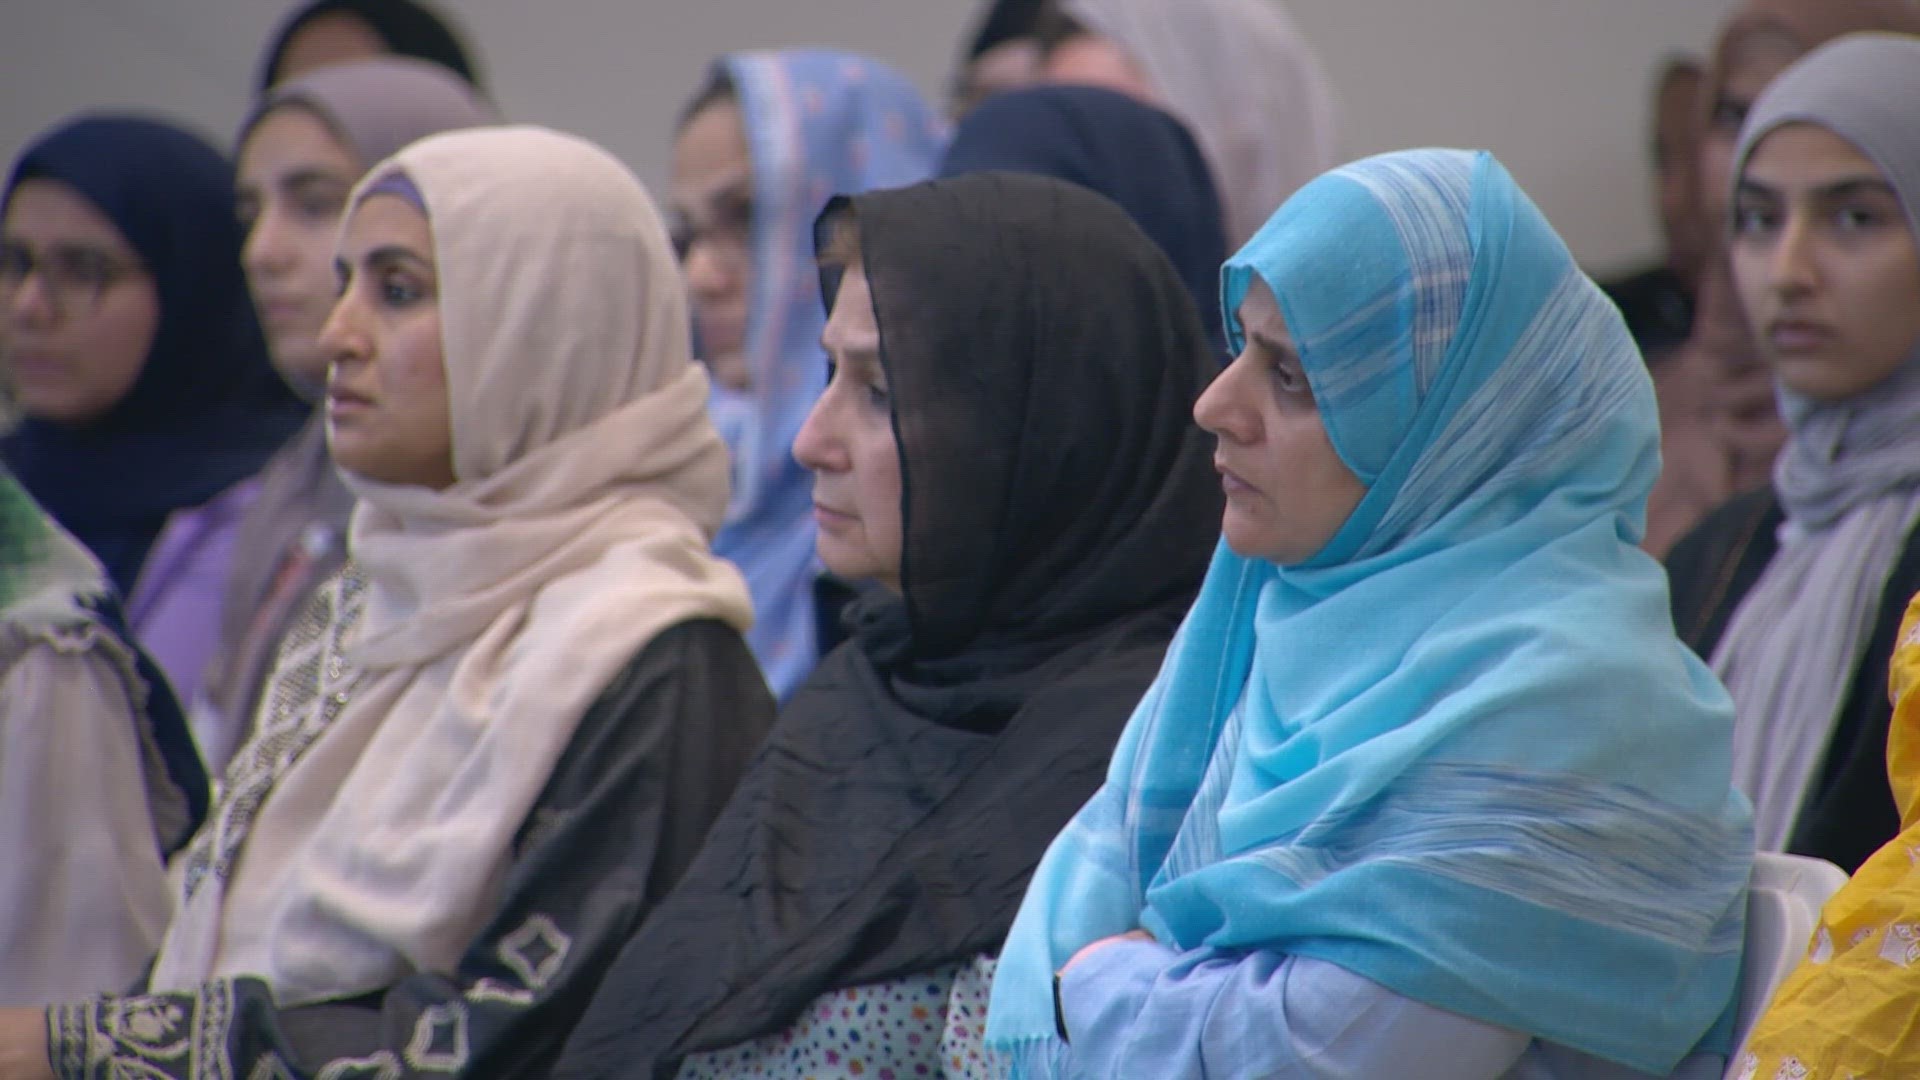 Faith and mental health were focal points of the vigil held inside the Islamic Association of Allen.